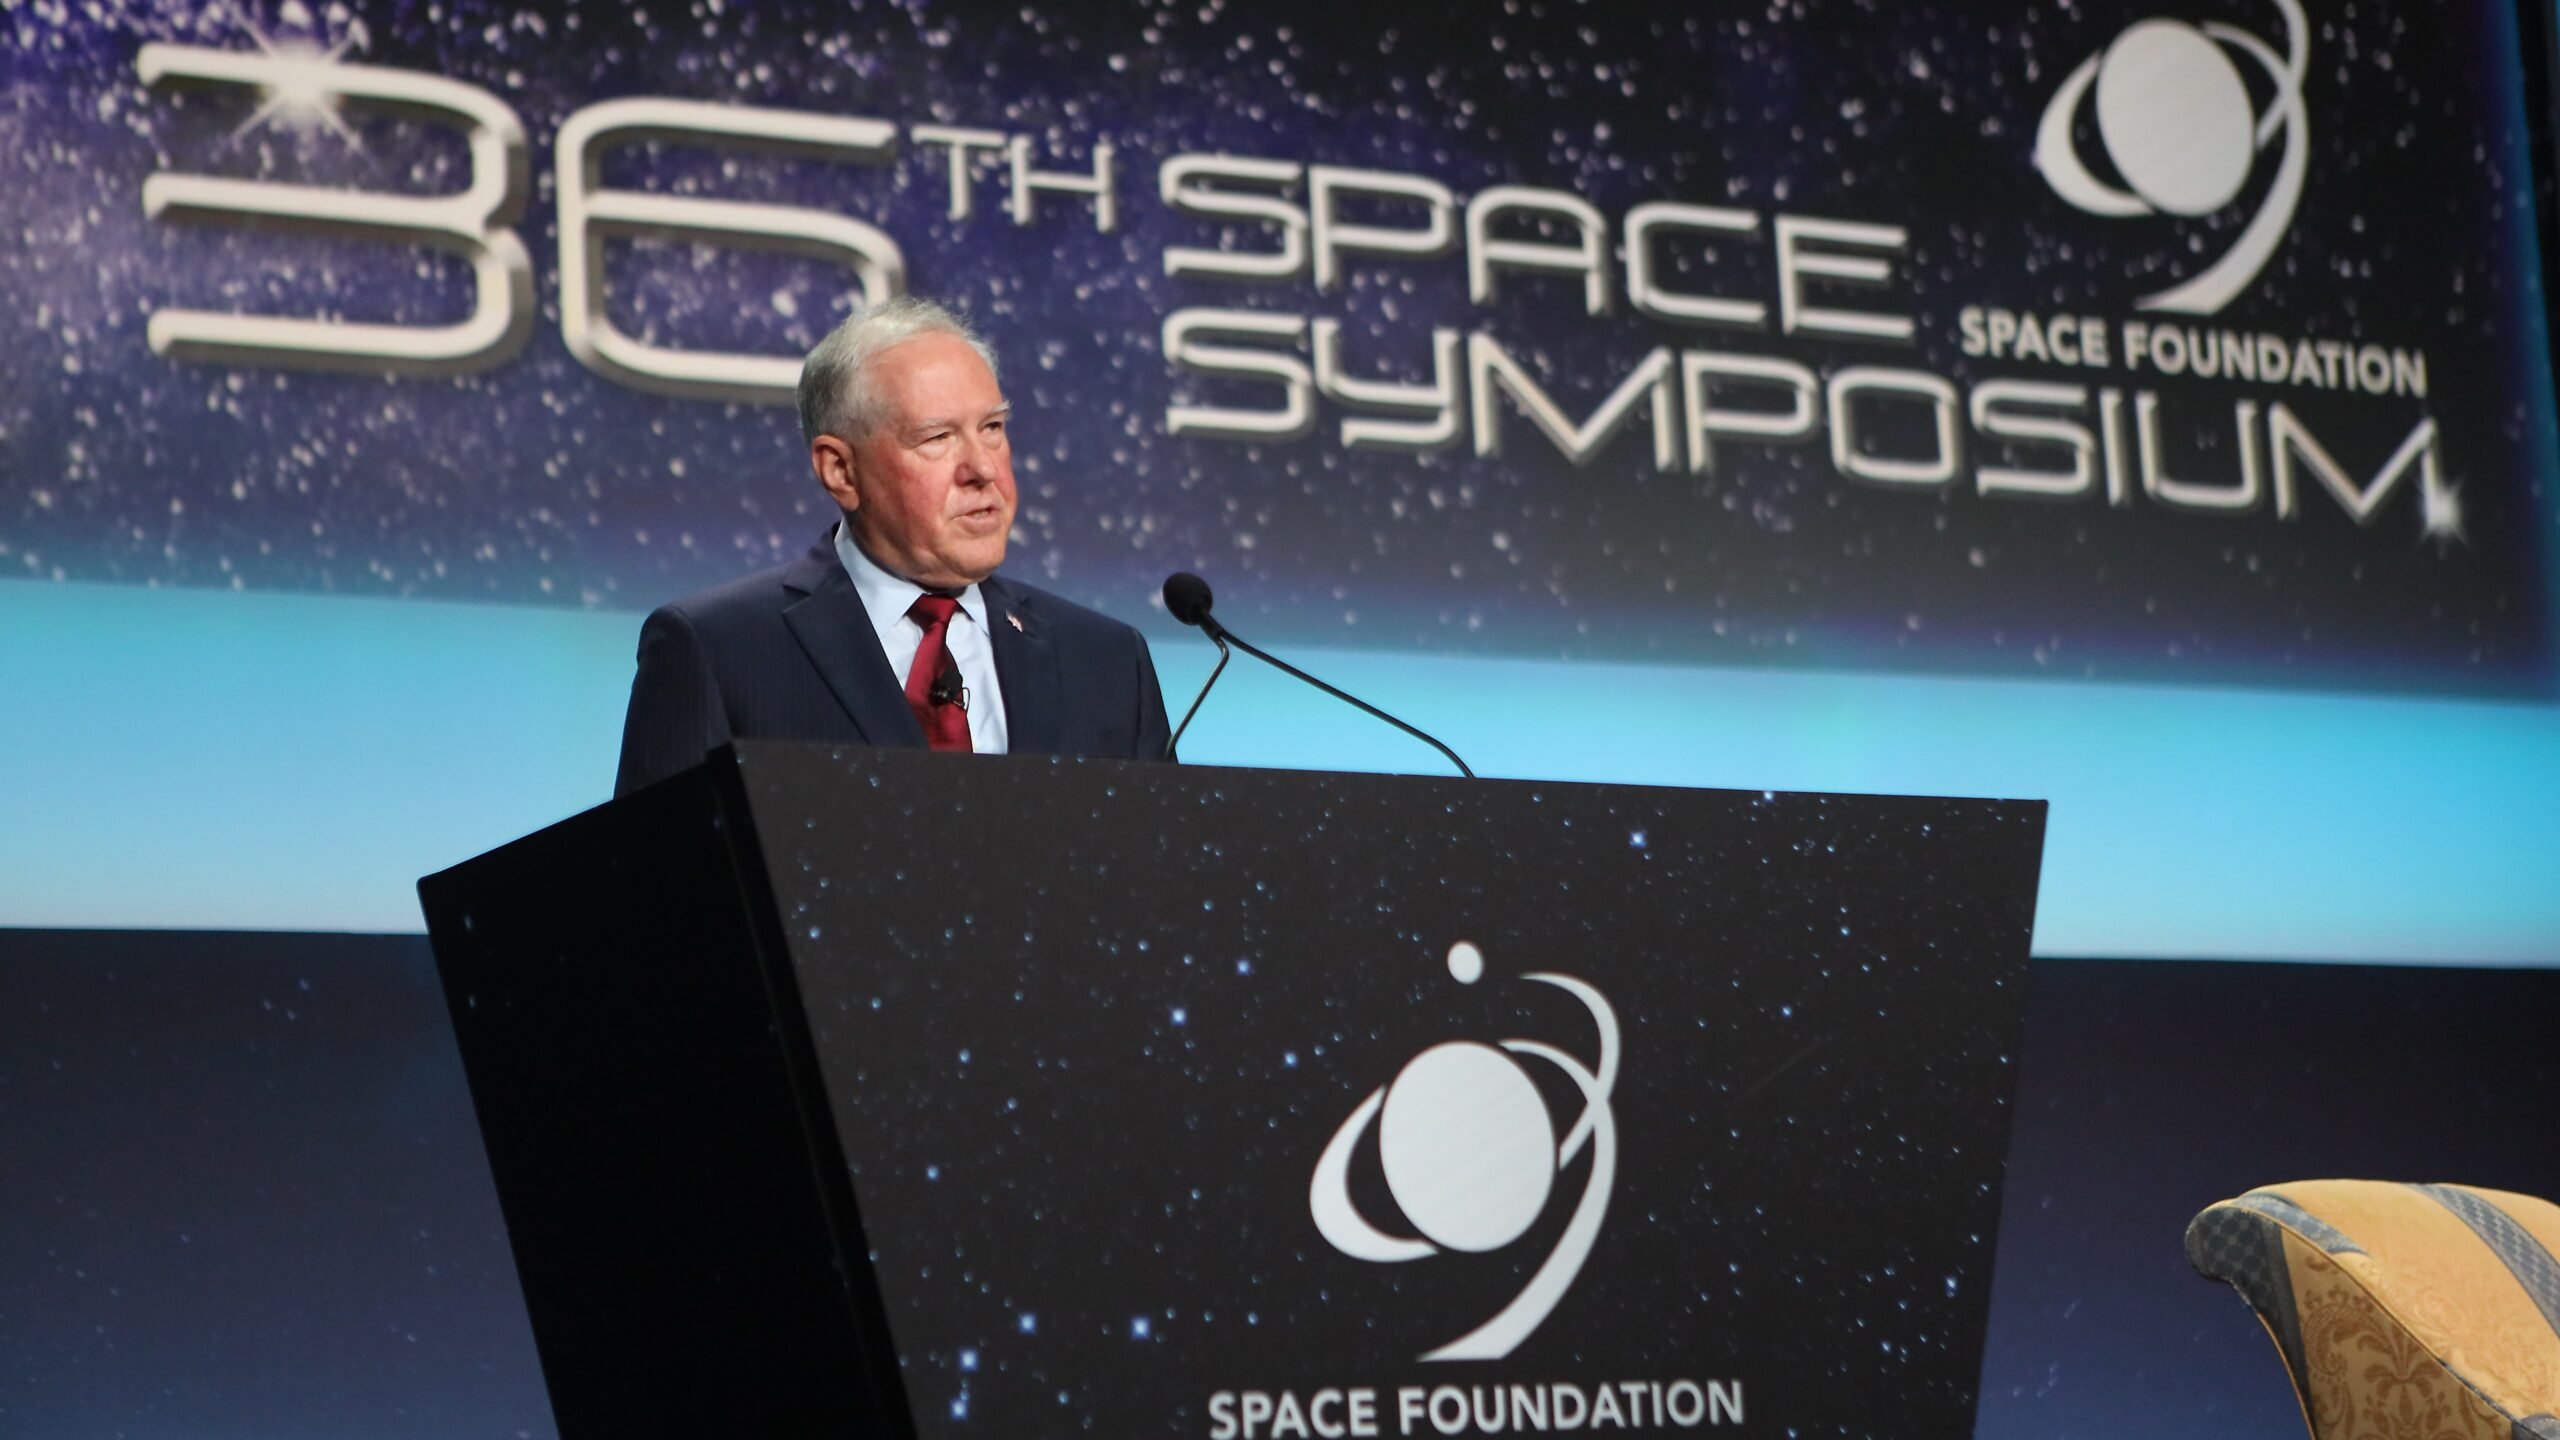 NRO, Air Force may co-fund future space-based ISR tech: Kendall